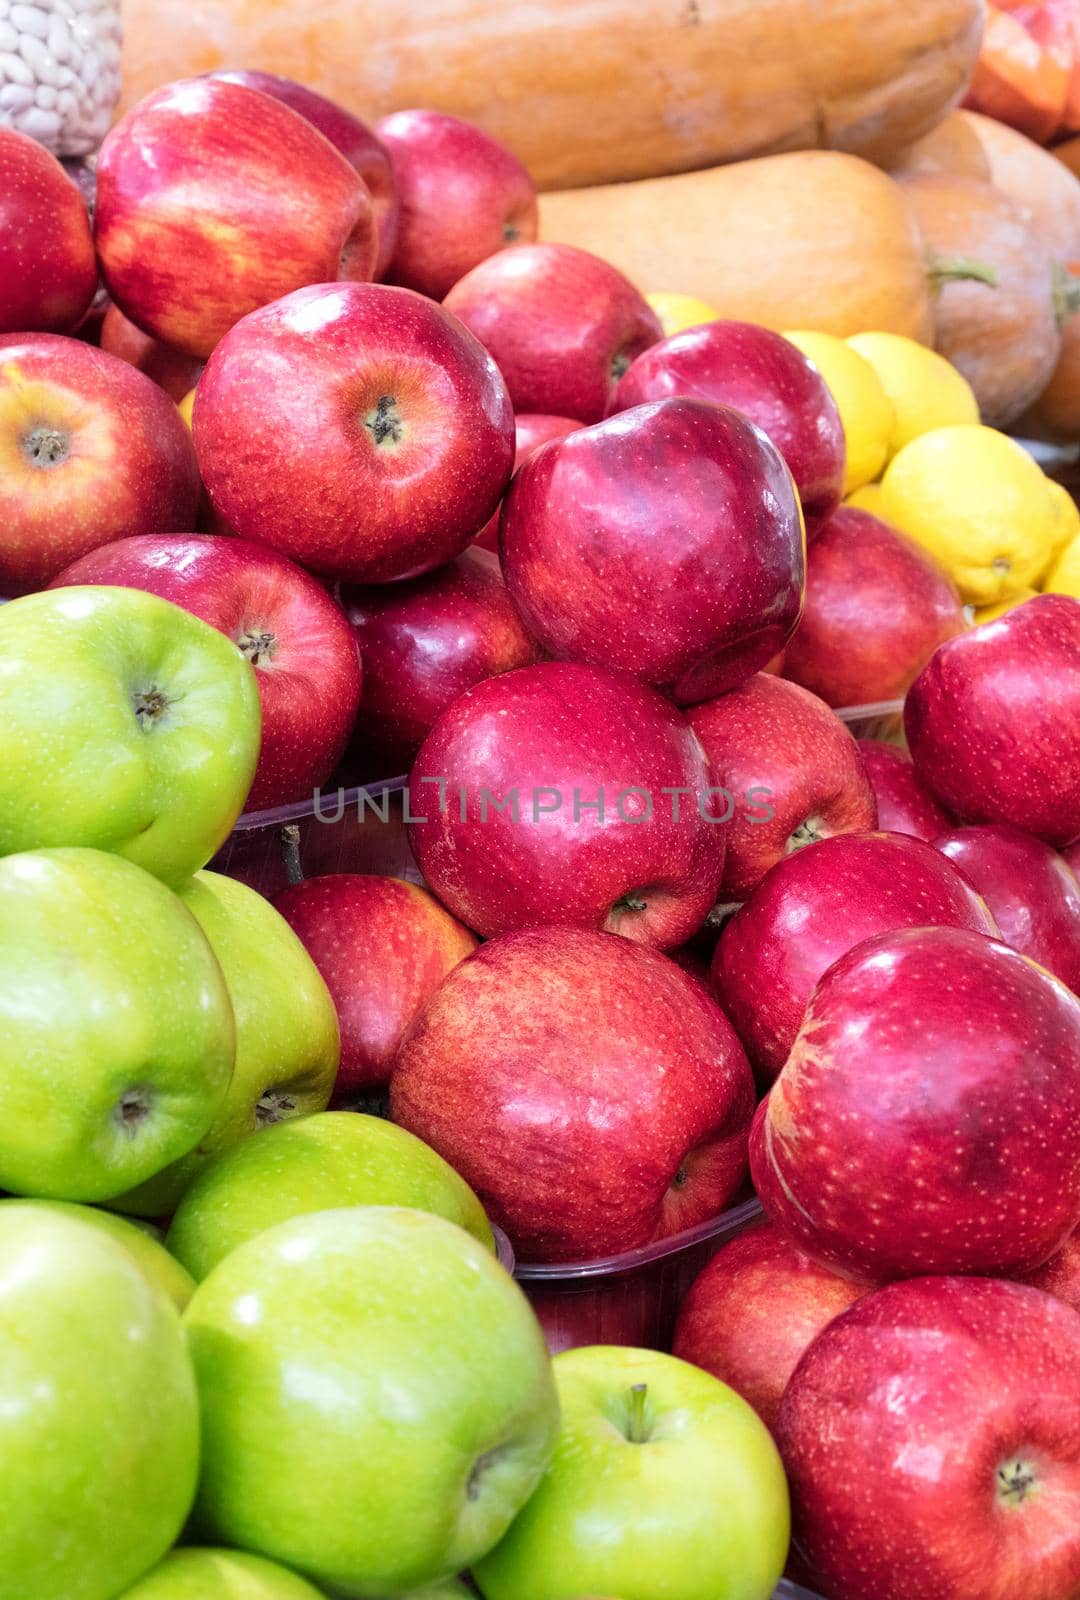 Bright picture of fresh red and green apples, lemons, pumpkins and other vegetables for sale in the market. Vertical image, close-up.